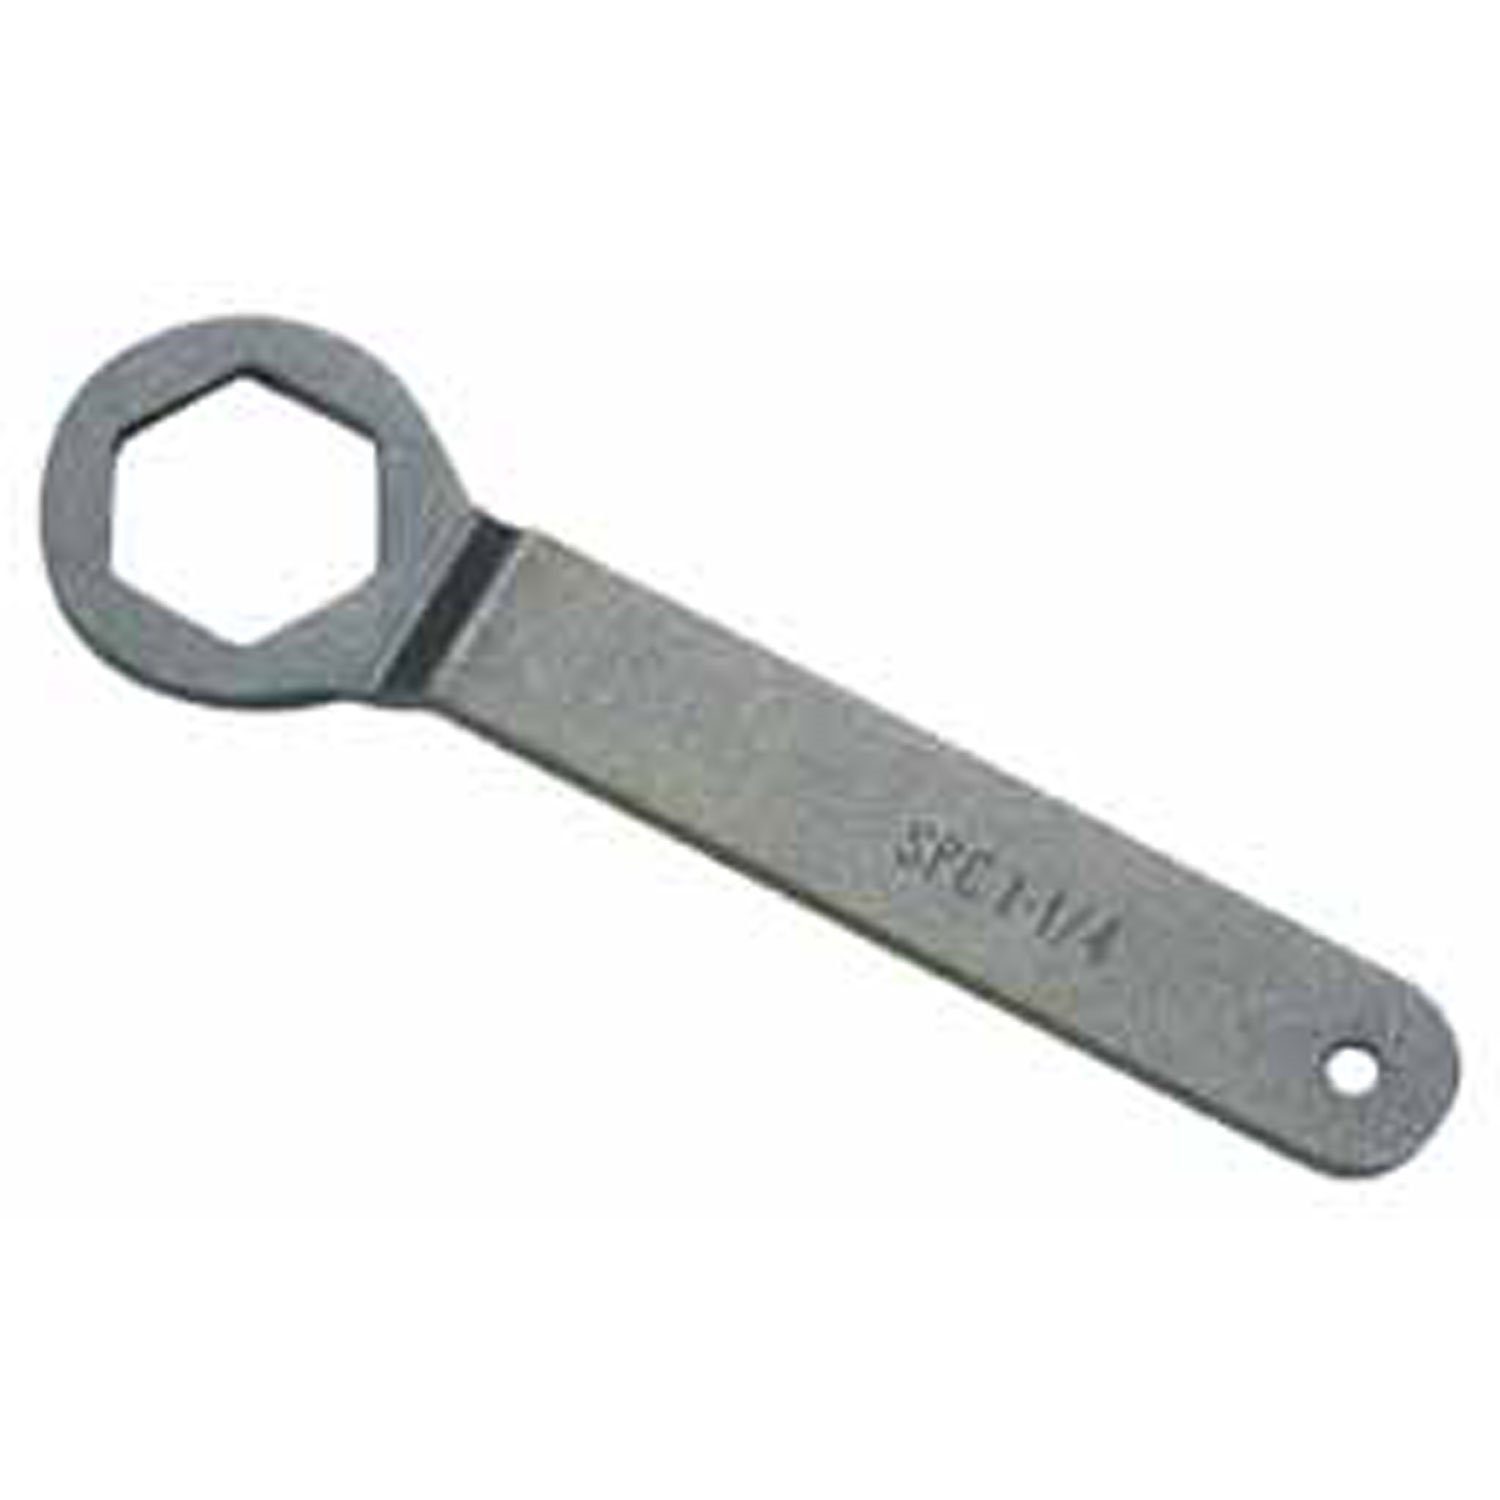 1-1/4 BOX END WRENCH